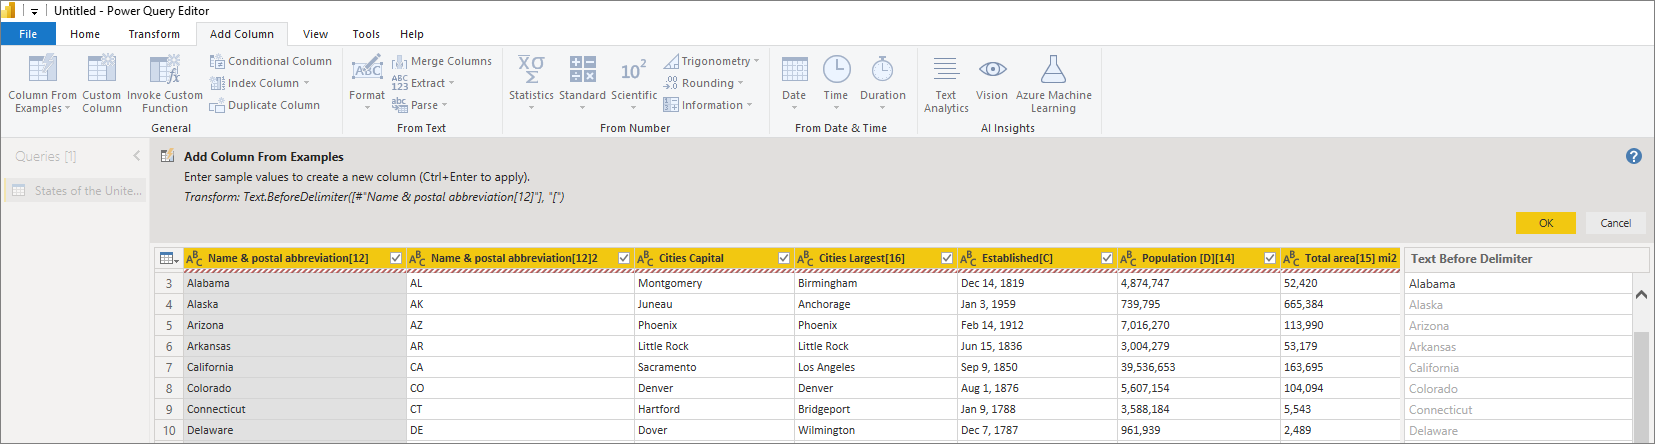 Screenshot of Power Query Editor, showing how to add a column from examples in Power BI Desktop.